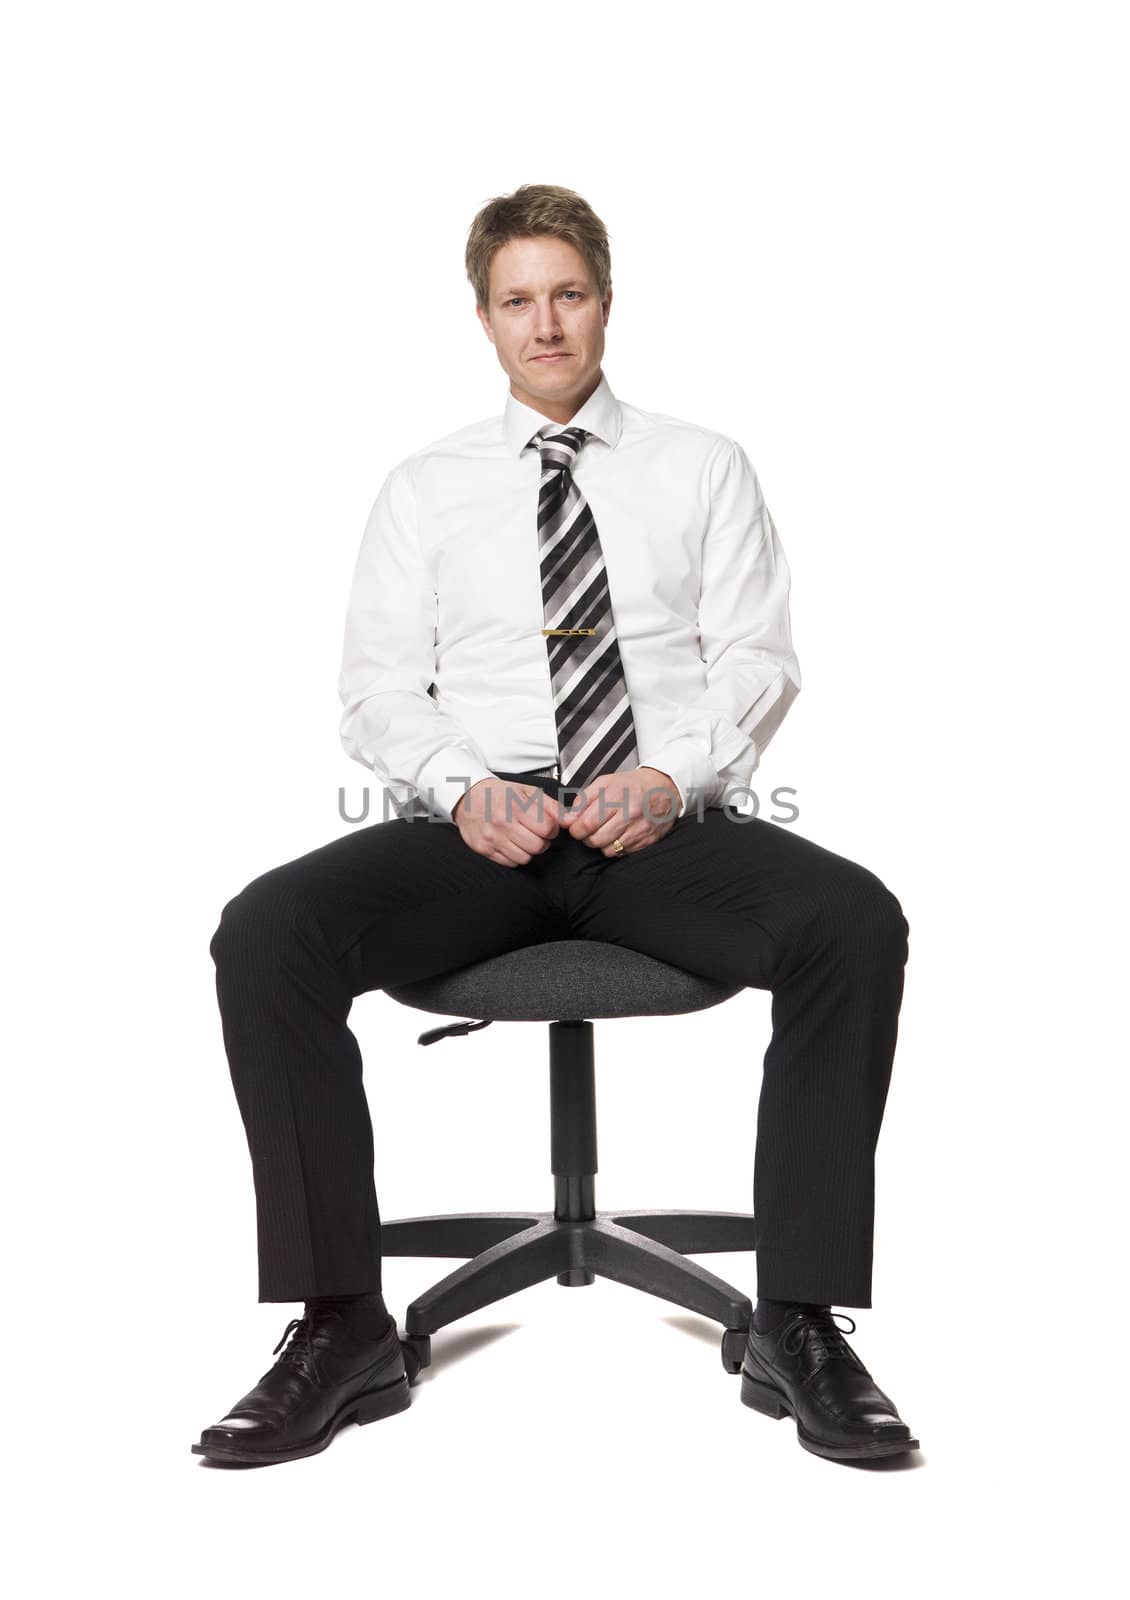 Man siting on an office chair by gemenacom